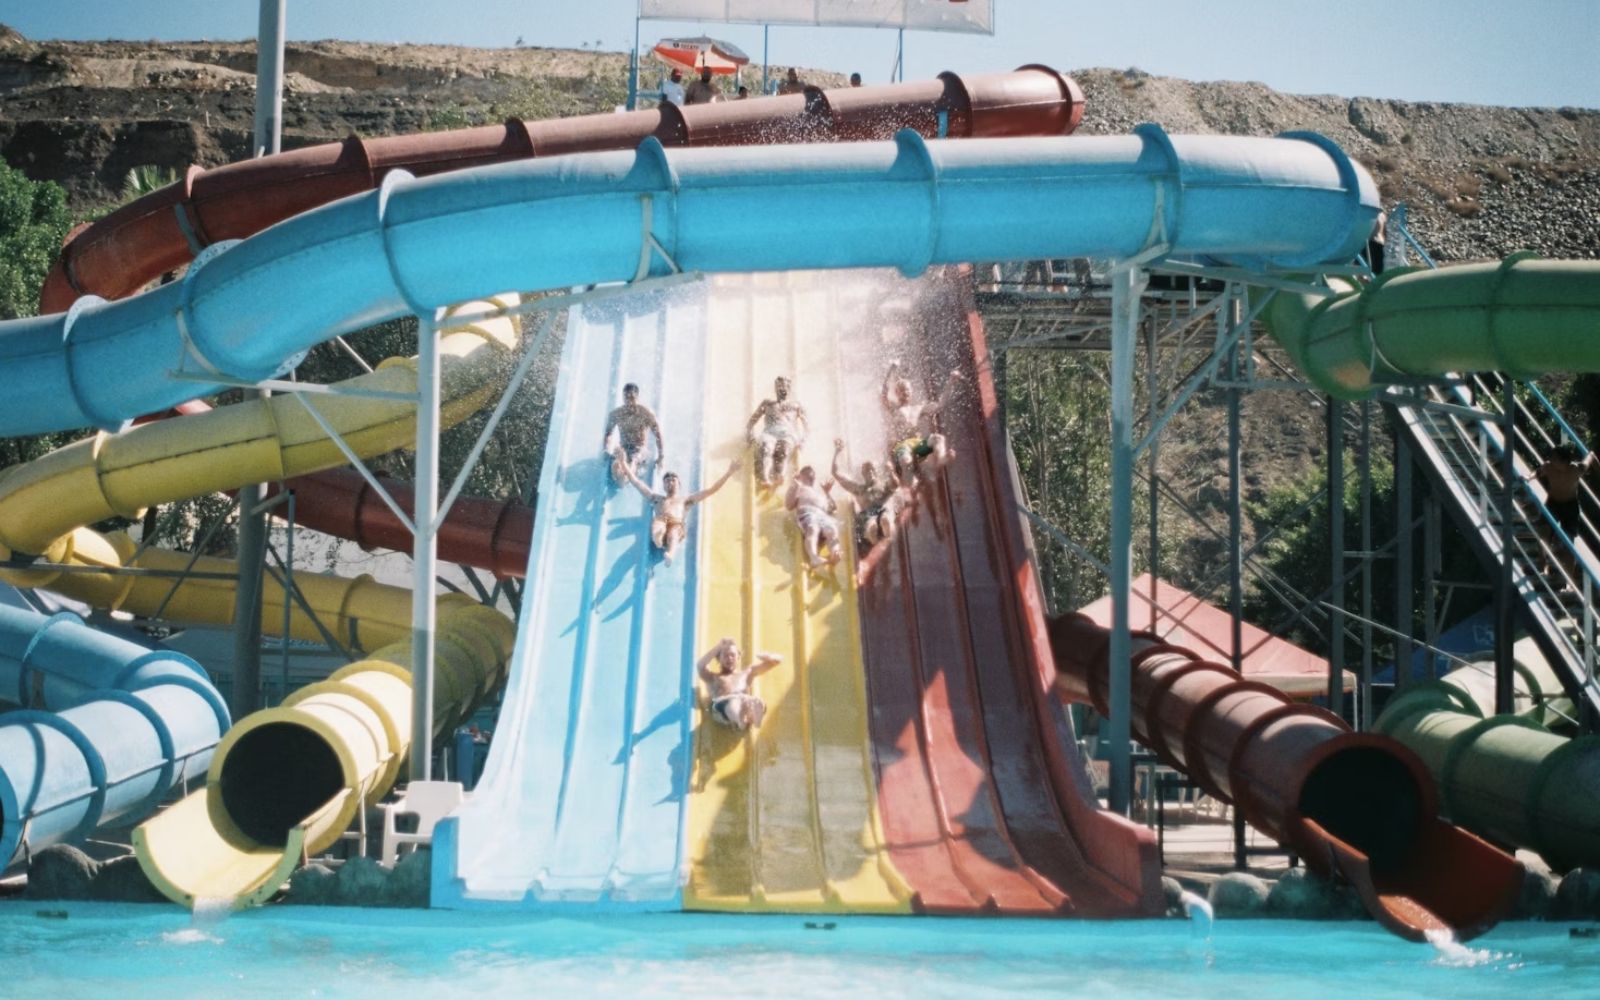 Top Tips for Water Park Slogans Worth Sliding Into.